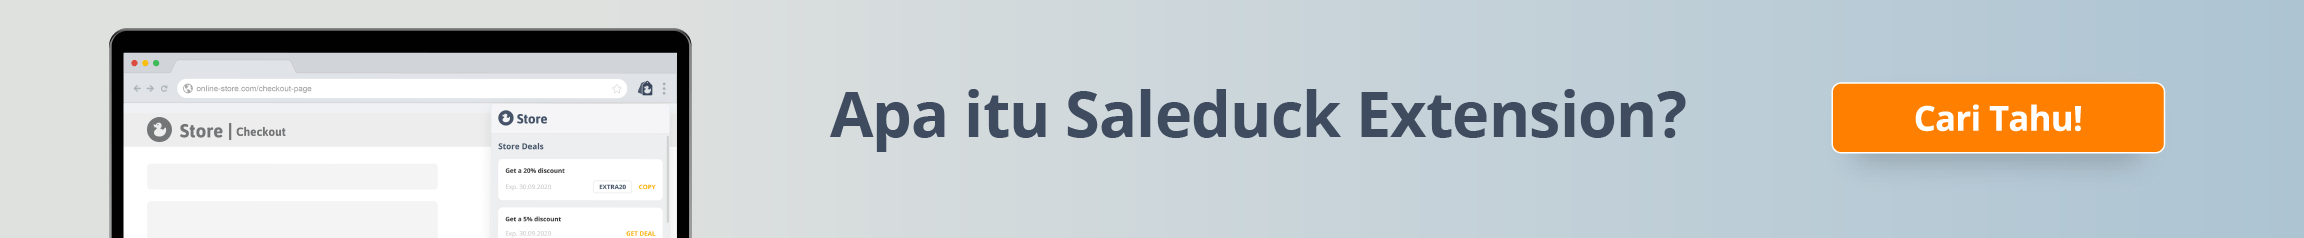 saleduck extension-03.png